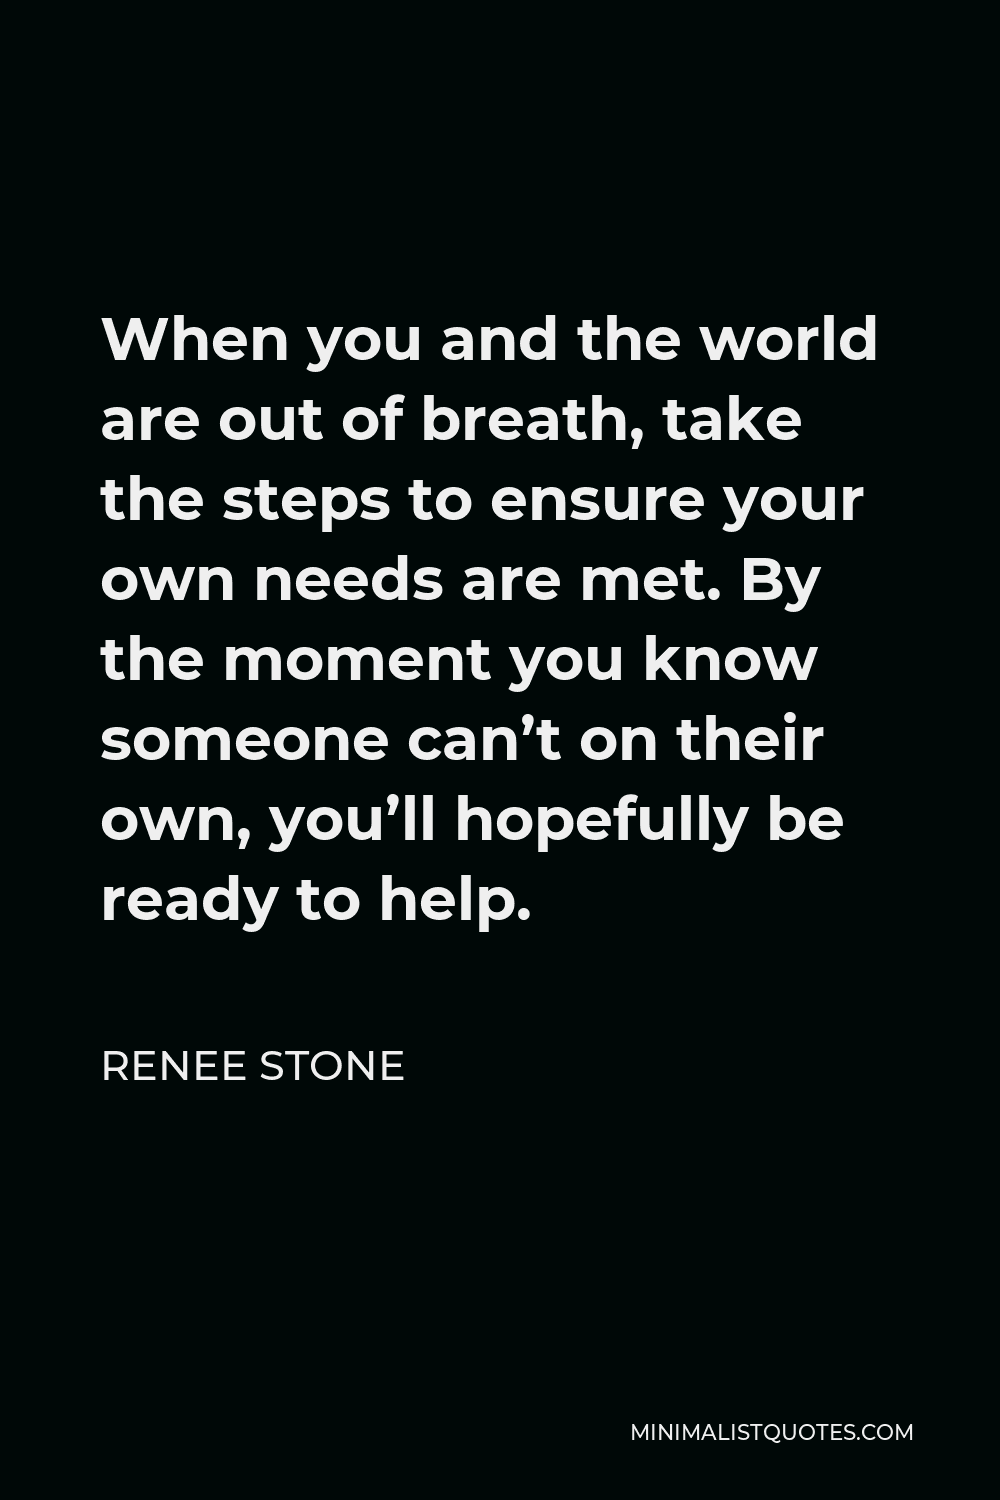 Renee Stone Quote - When you and the world are out of breath, take the steps to ensure your own needs are met. By the moment you know someone can’t on their own, you’ll hopefully be ready to help.